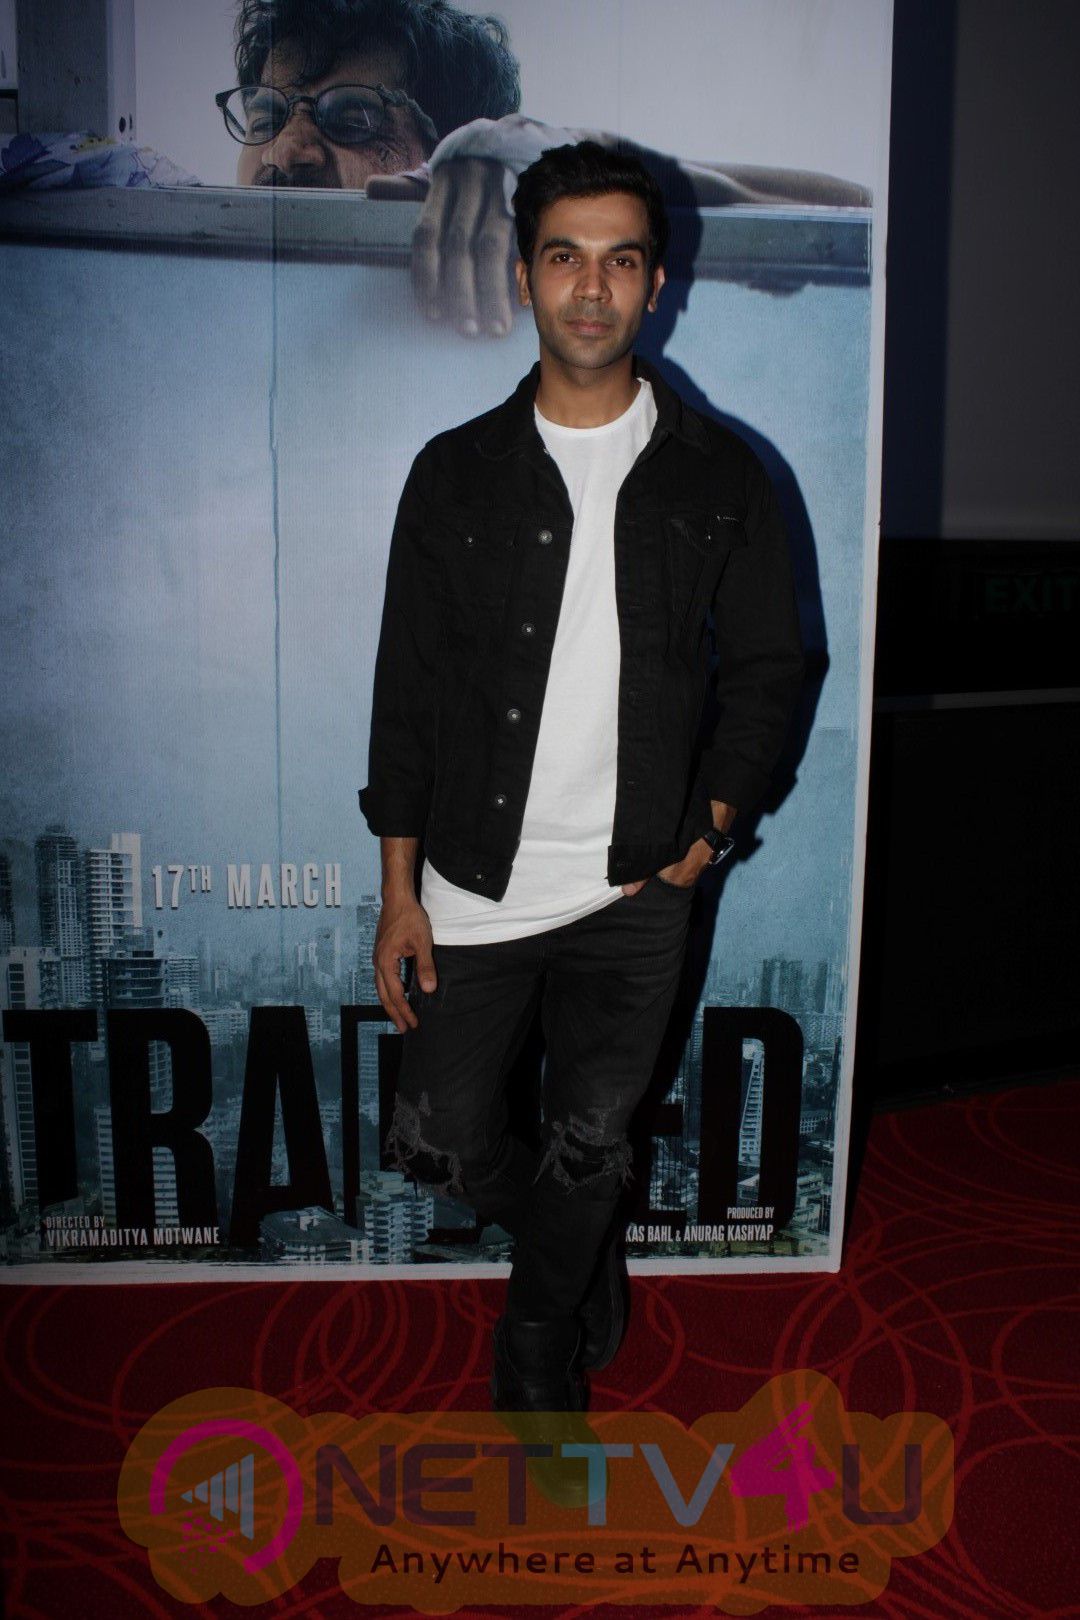  Trailer Launch Of Film Trapped With Rajkummar Rao & Vikas Bahl Photos Tamil Gallery